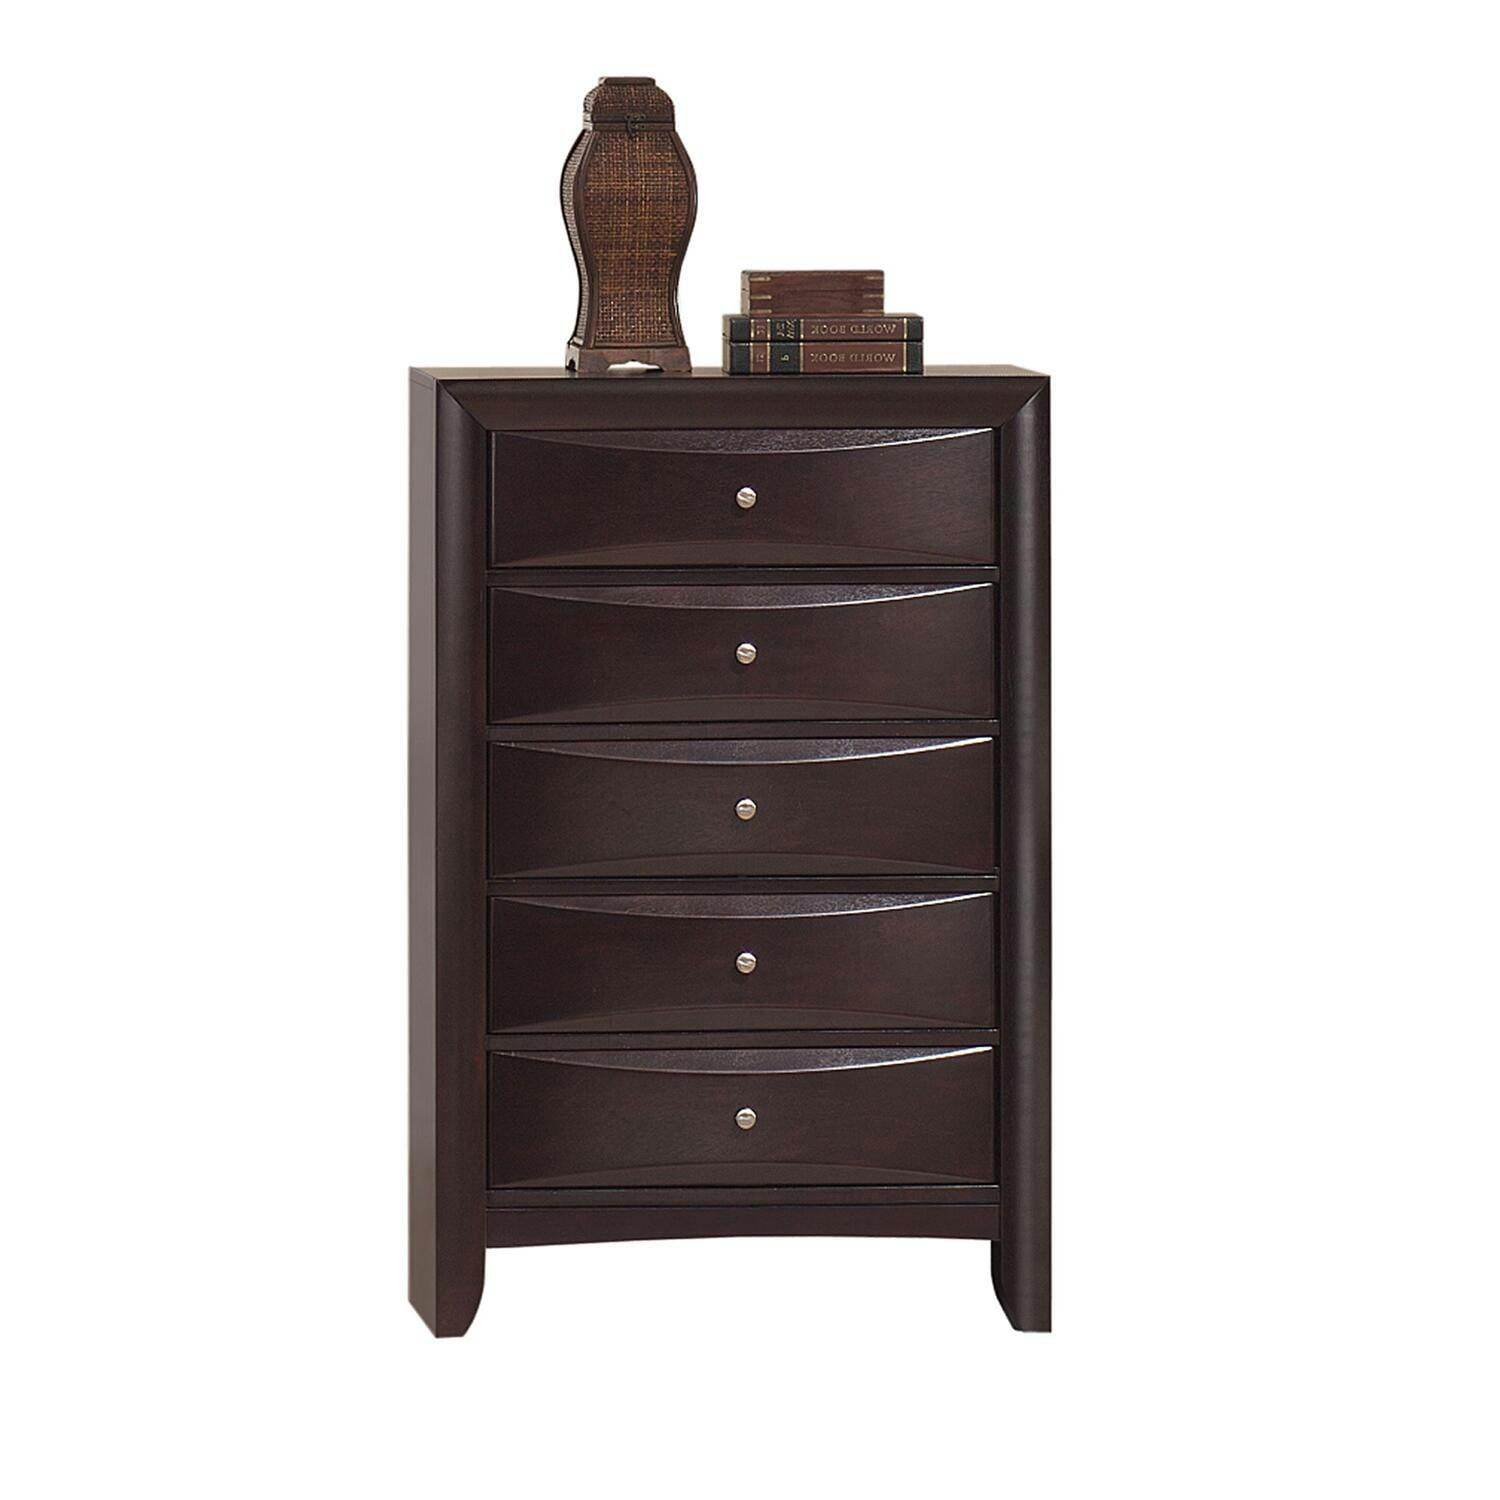 Transitional Mahogany 5-Drawer Chest with Dovetail Drawers